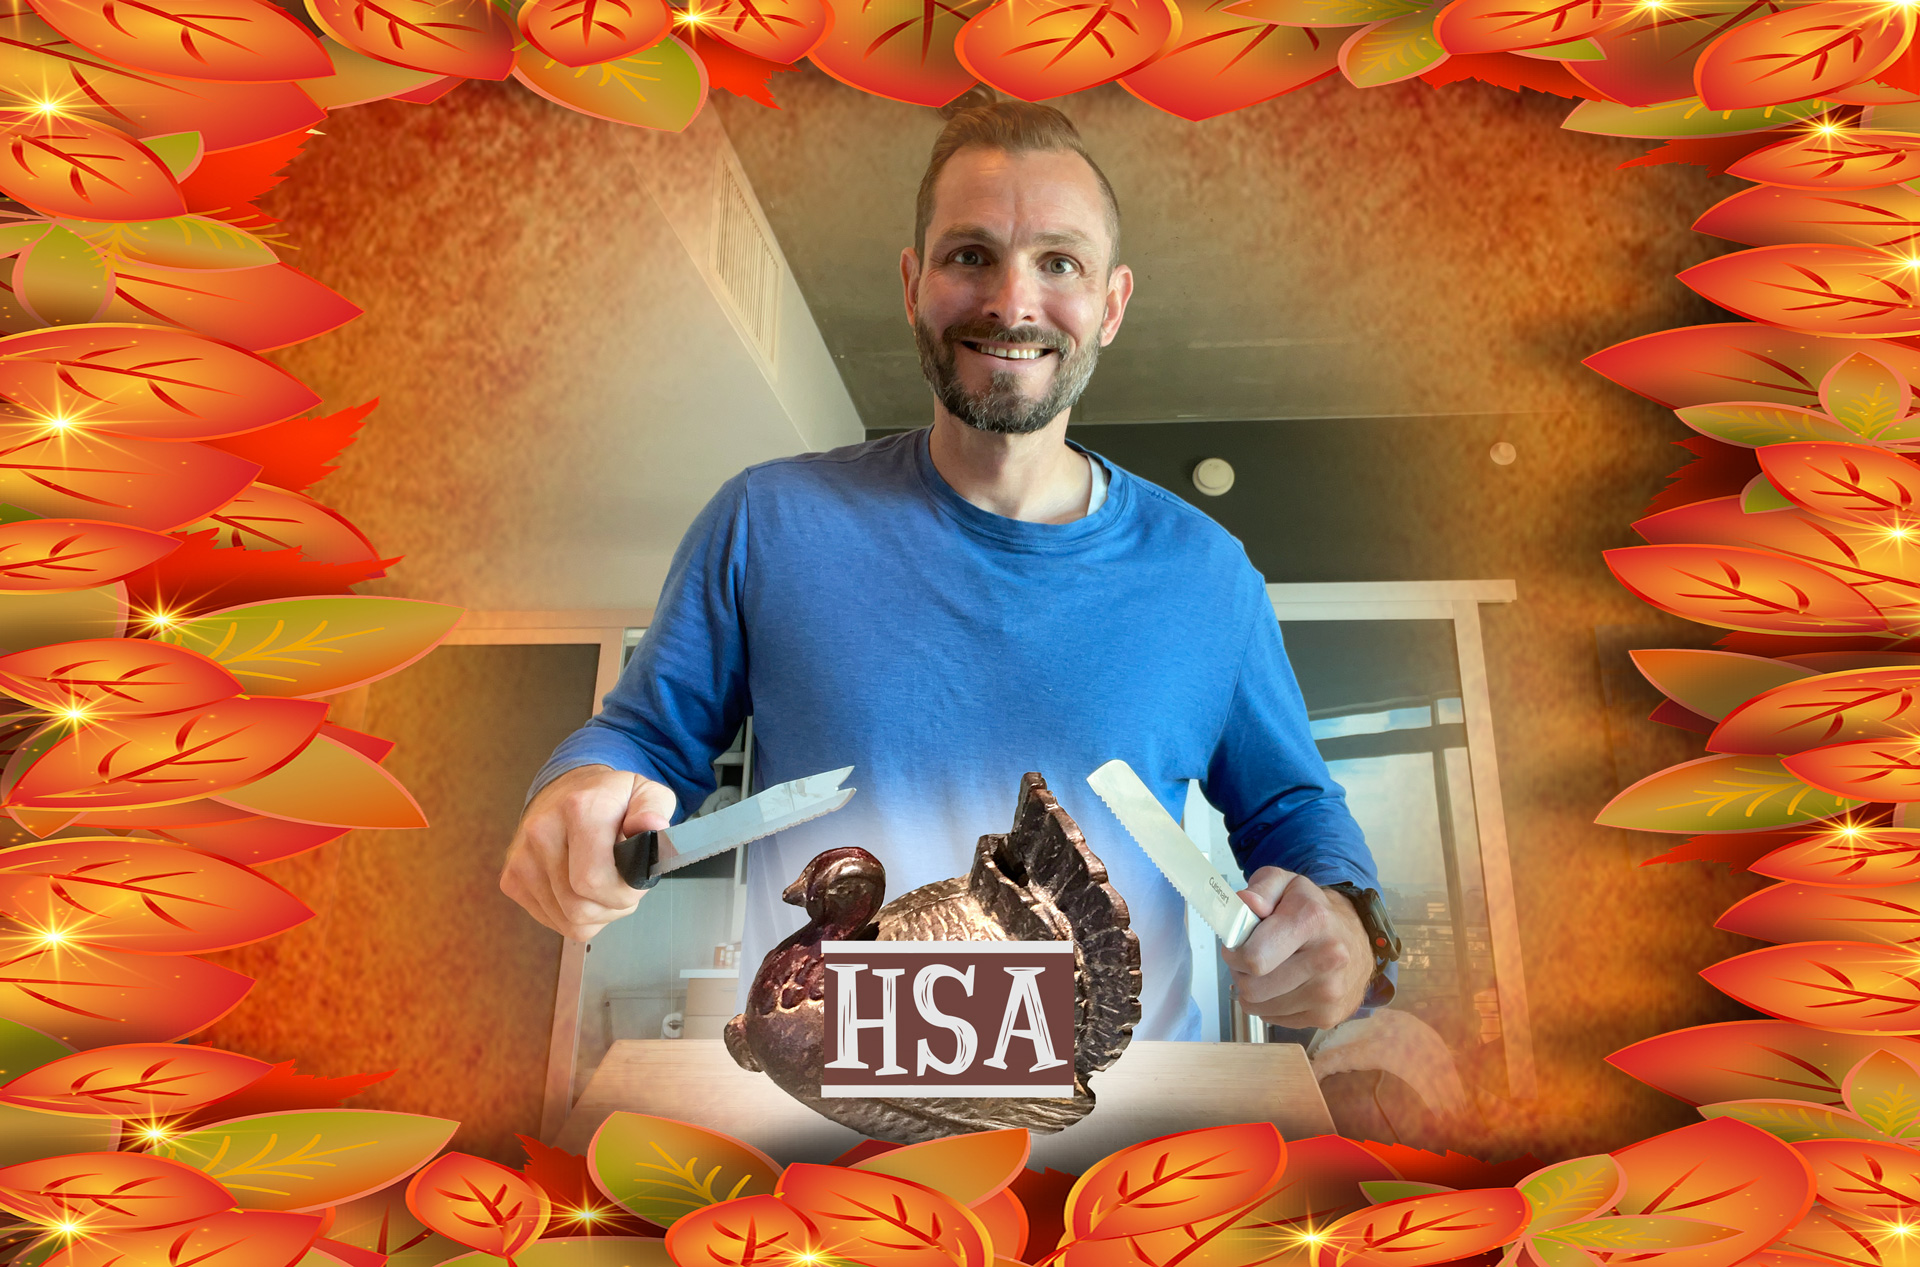 Homo Money thankful for his HSA this Thanksgiving